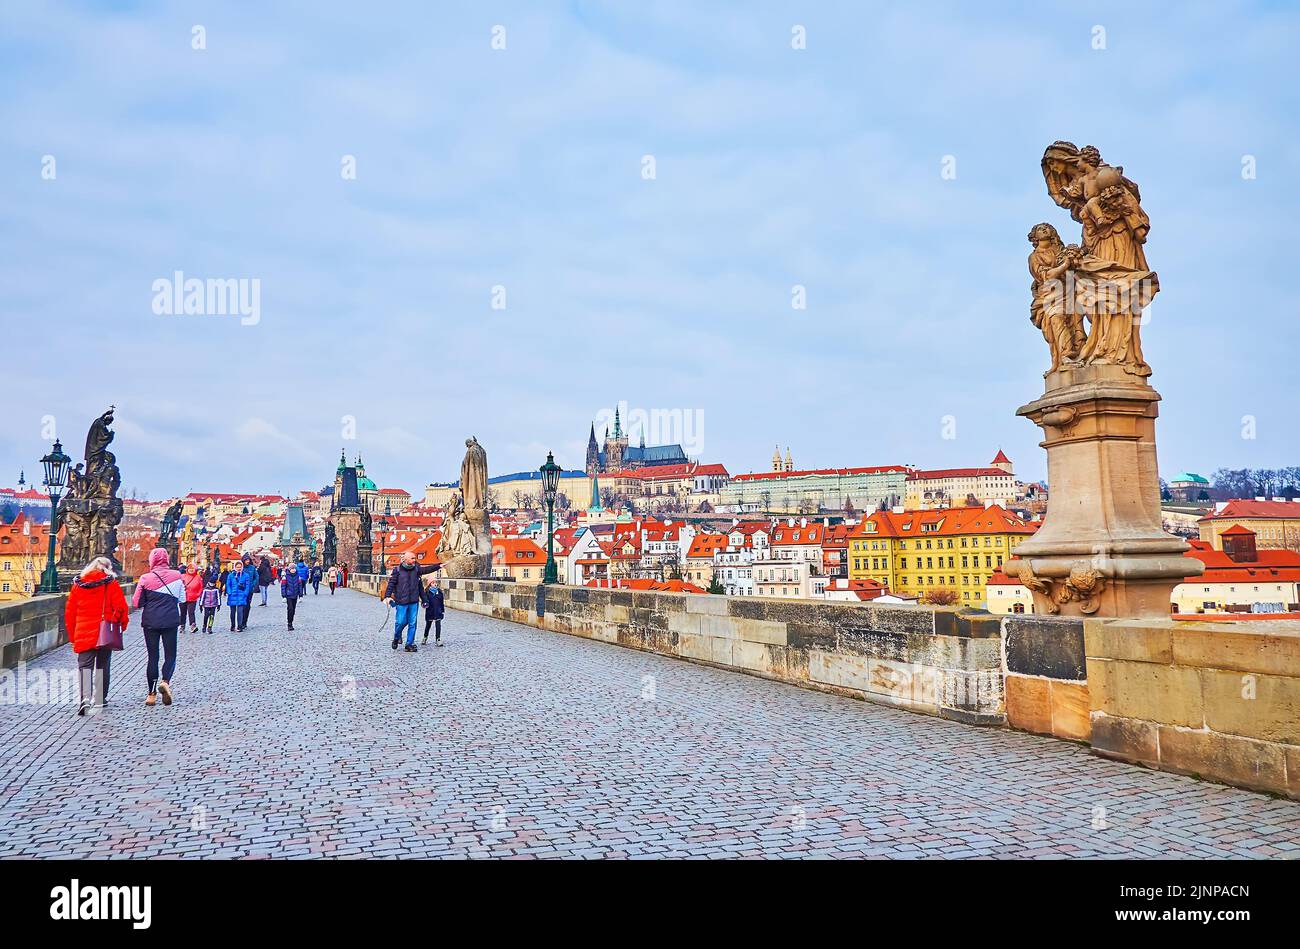 PRAGUE, CZECH REPUBLIC - MARCH 6, 2022:  The carved stone statues on Charles Bridge with St Vitus Cathedral of Prague Castle in the background, on Mar Stock Photo